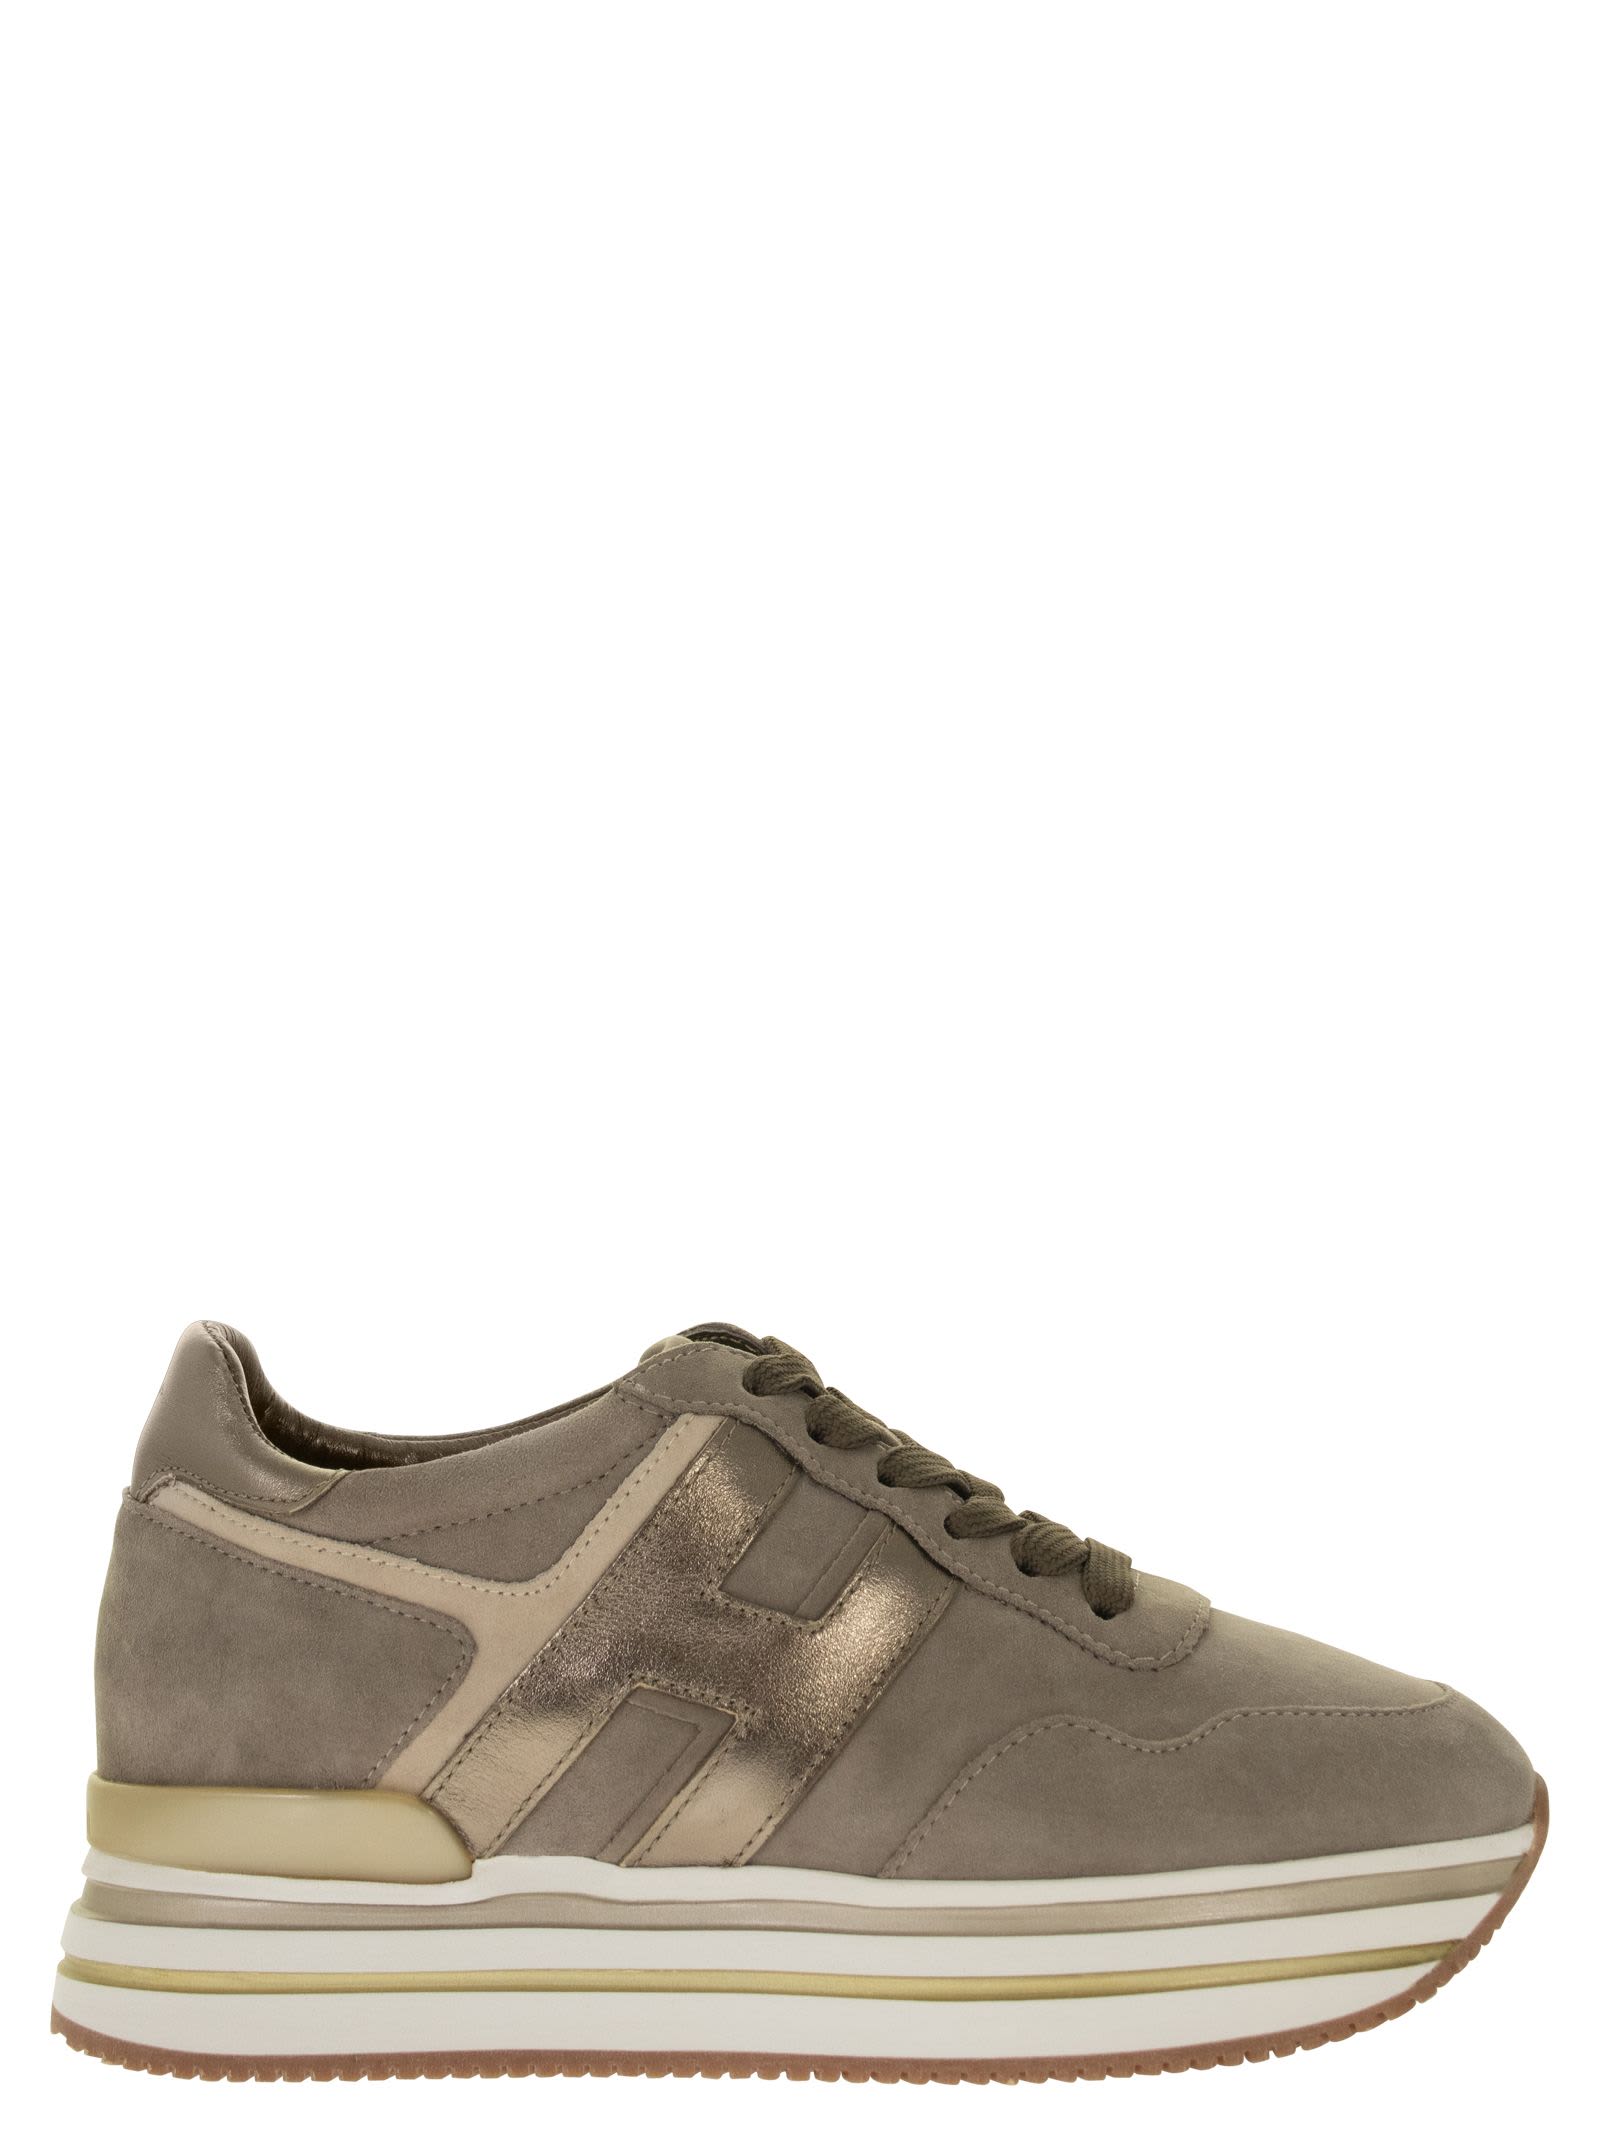 Hogan Midi H483 - Suede Leather Sneakers